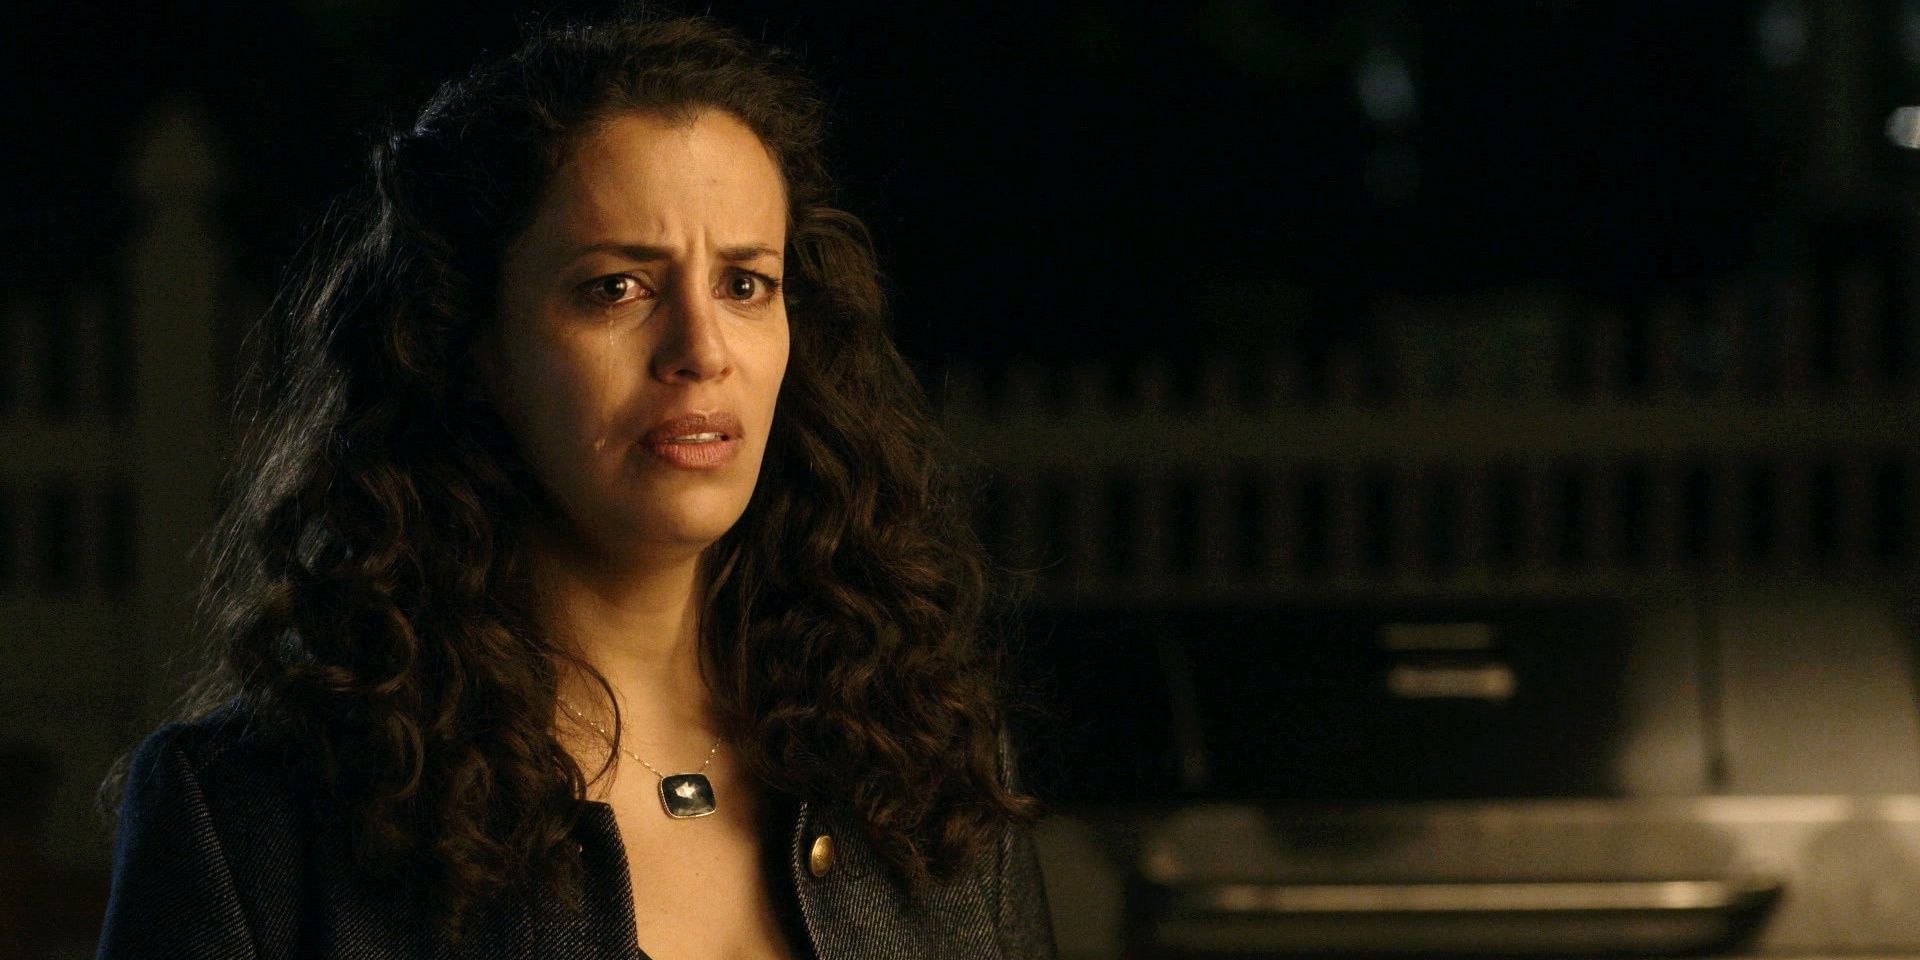 Grace crying and looking upset in Manifest.